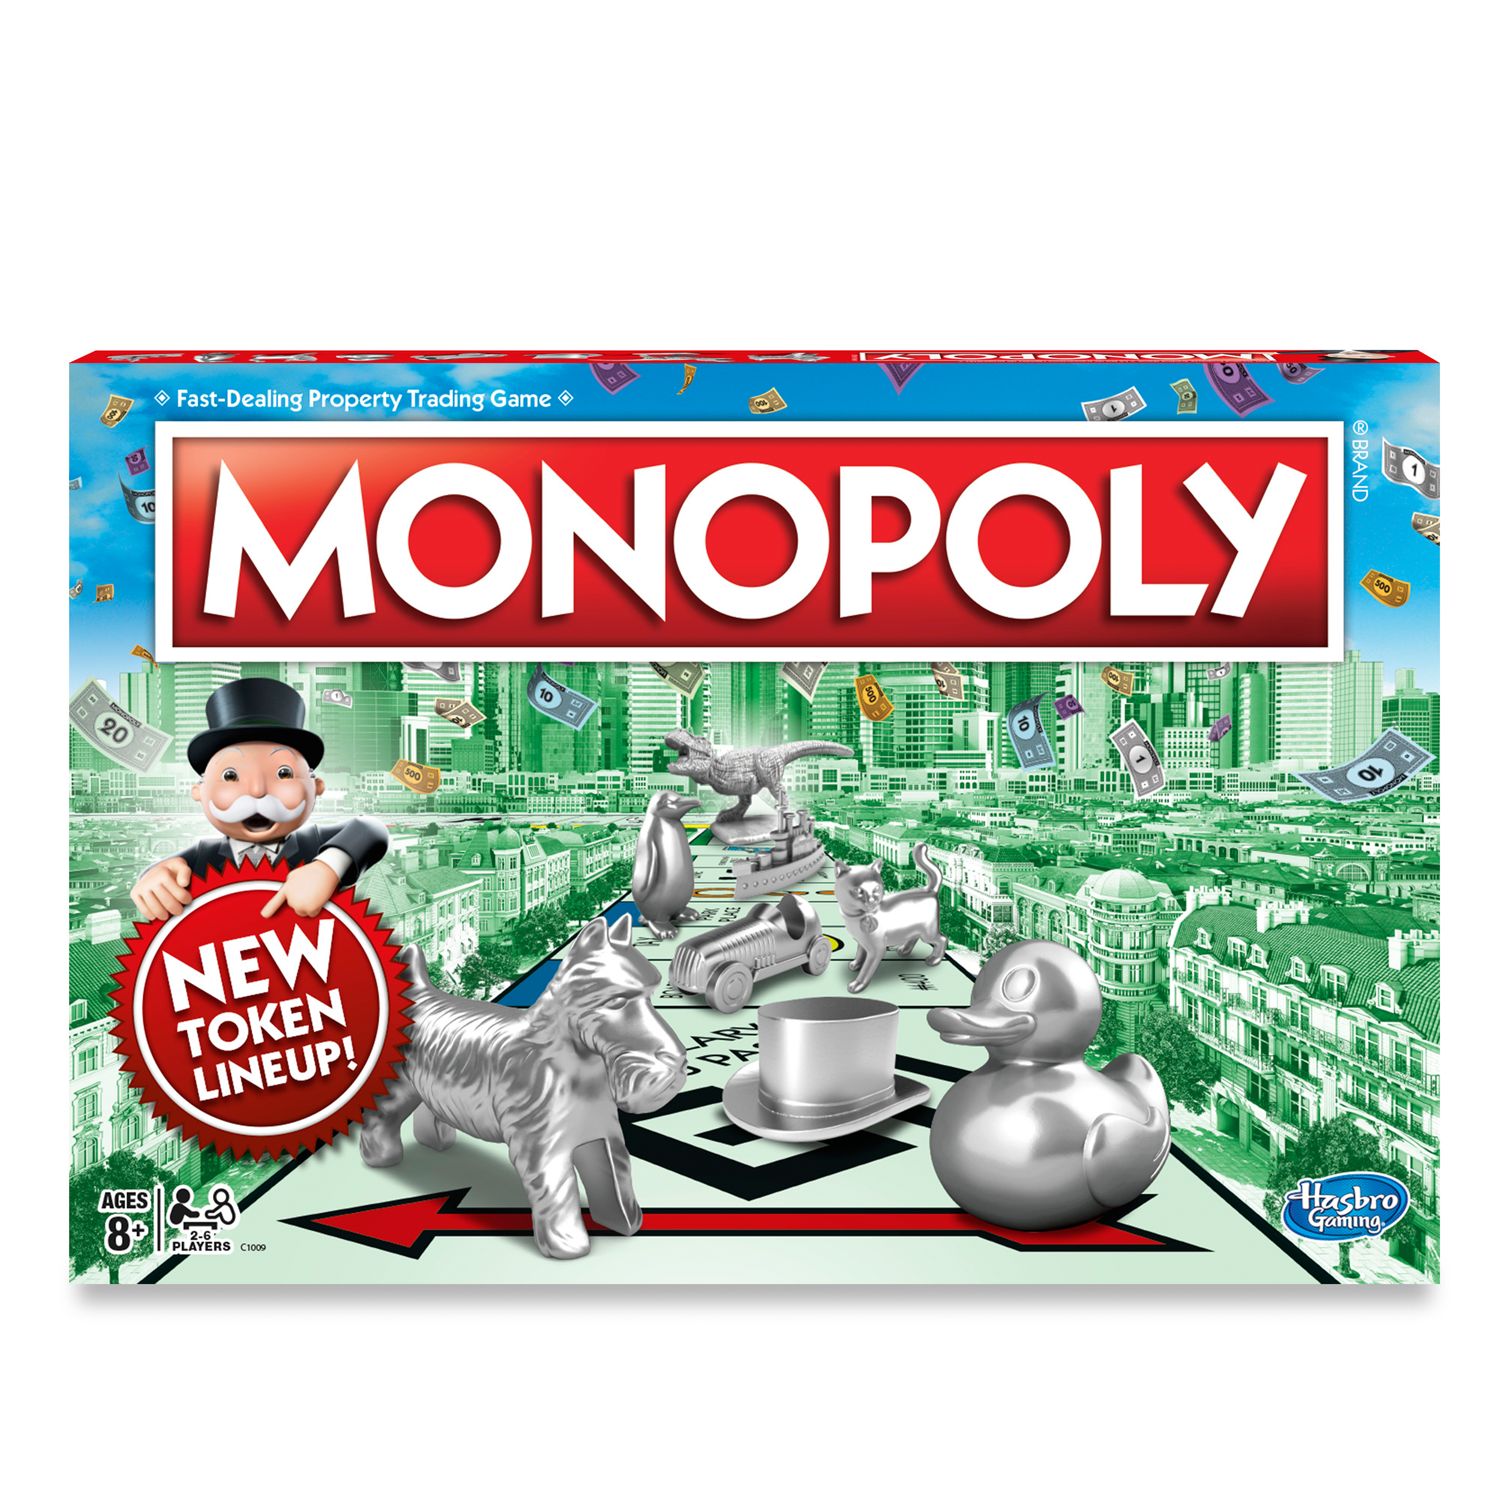 Image for Hasbro Monopoly Board Game by at Kohl's.